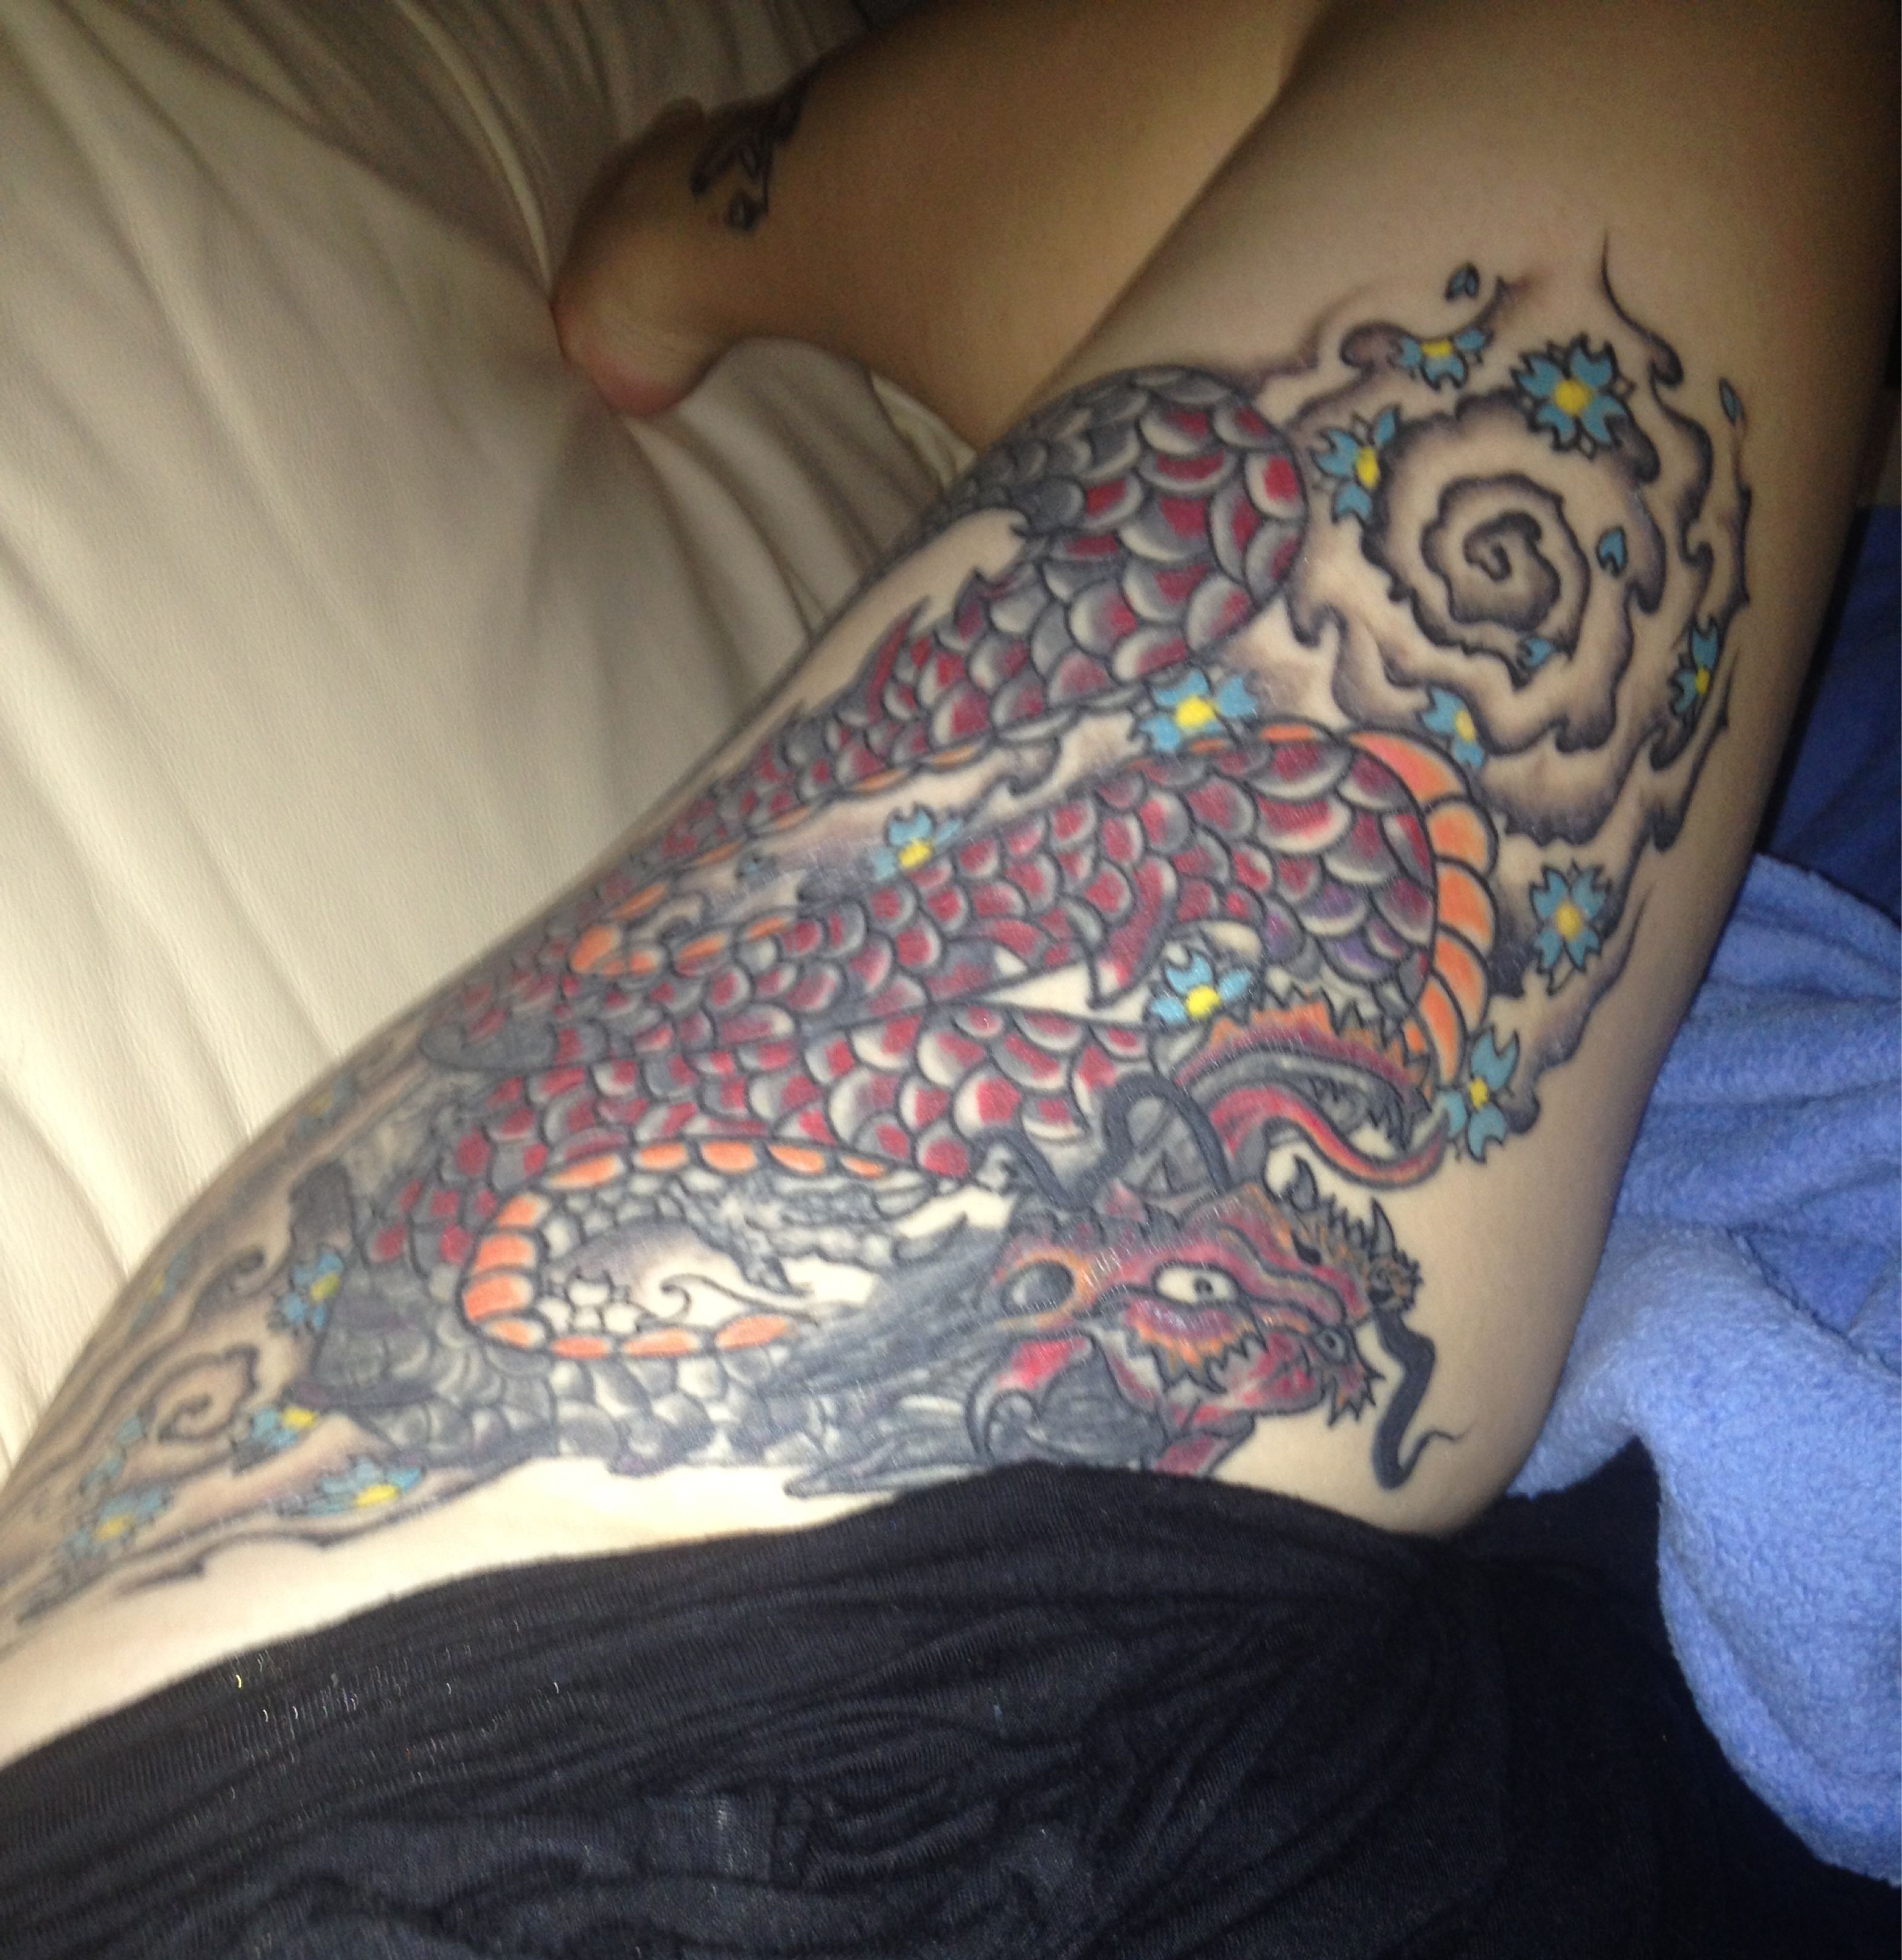 Tattoo uploaded by Noel Bonnici • Koi fish to cover up this tattoo